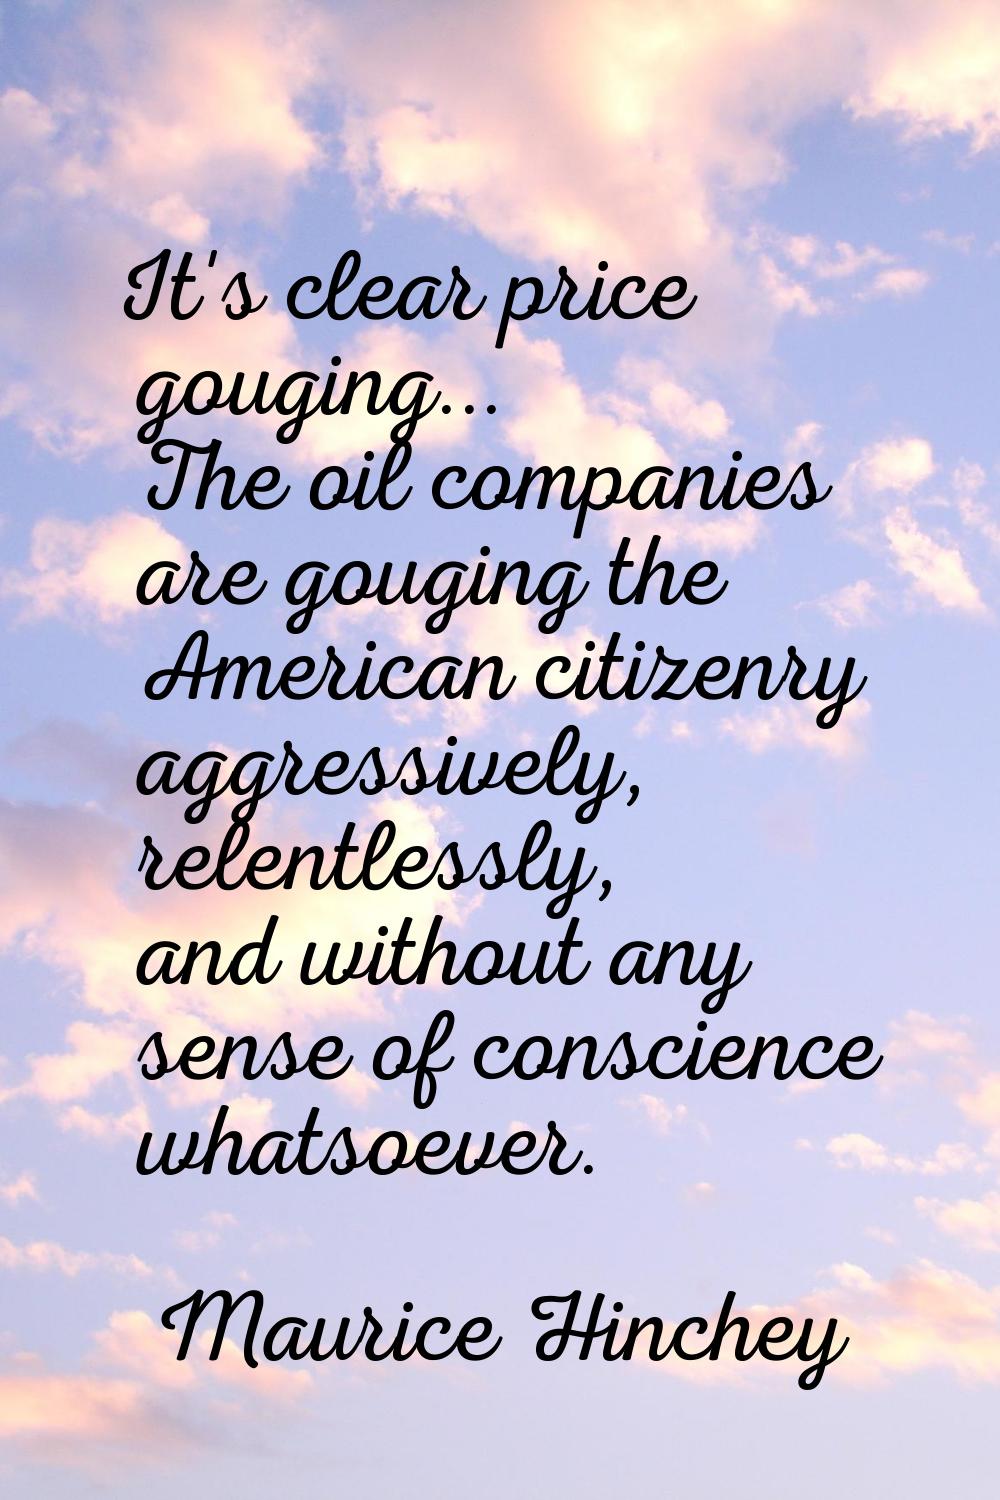 It's clear price gouging... The oil companies are gouging the American citizenry aggressively, rele